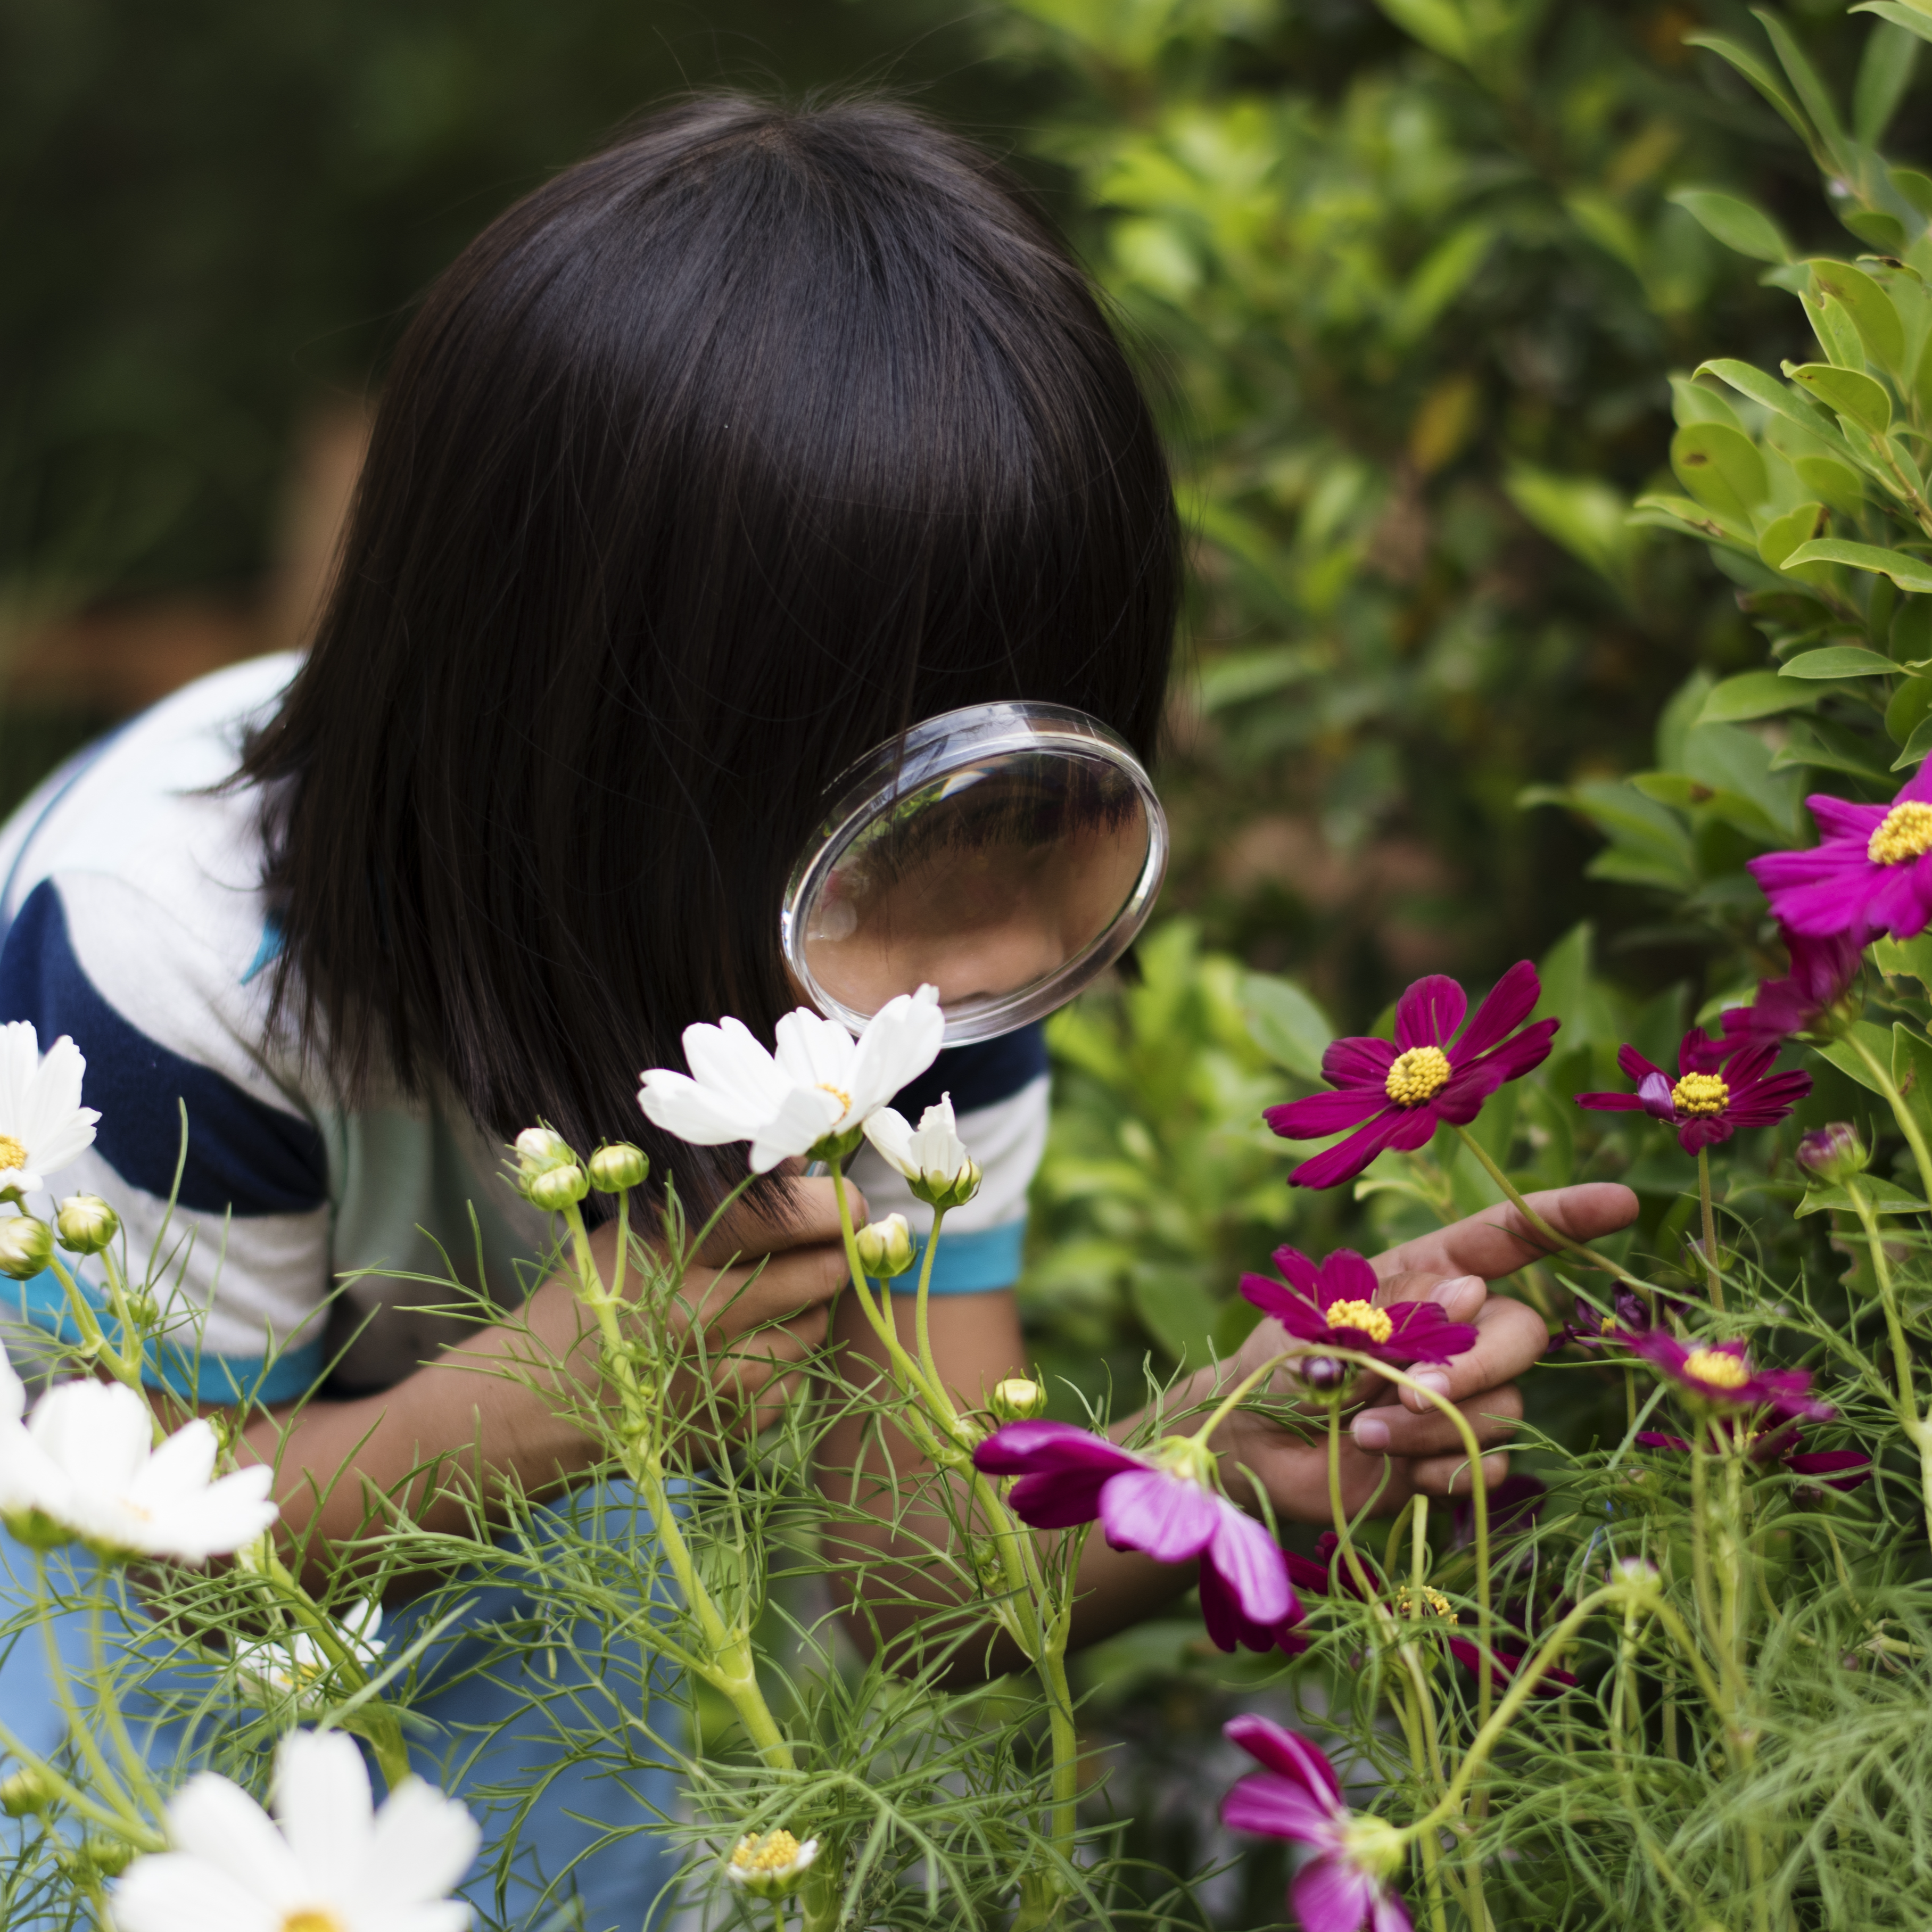 A young visitor examines a flower up close with a hand lens